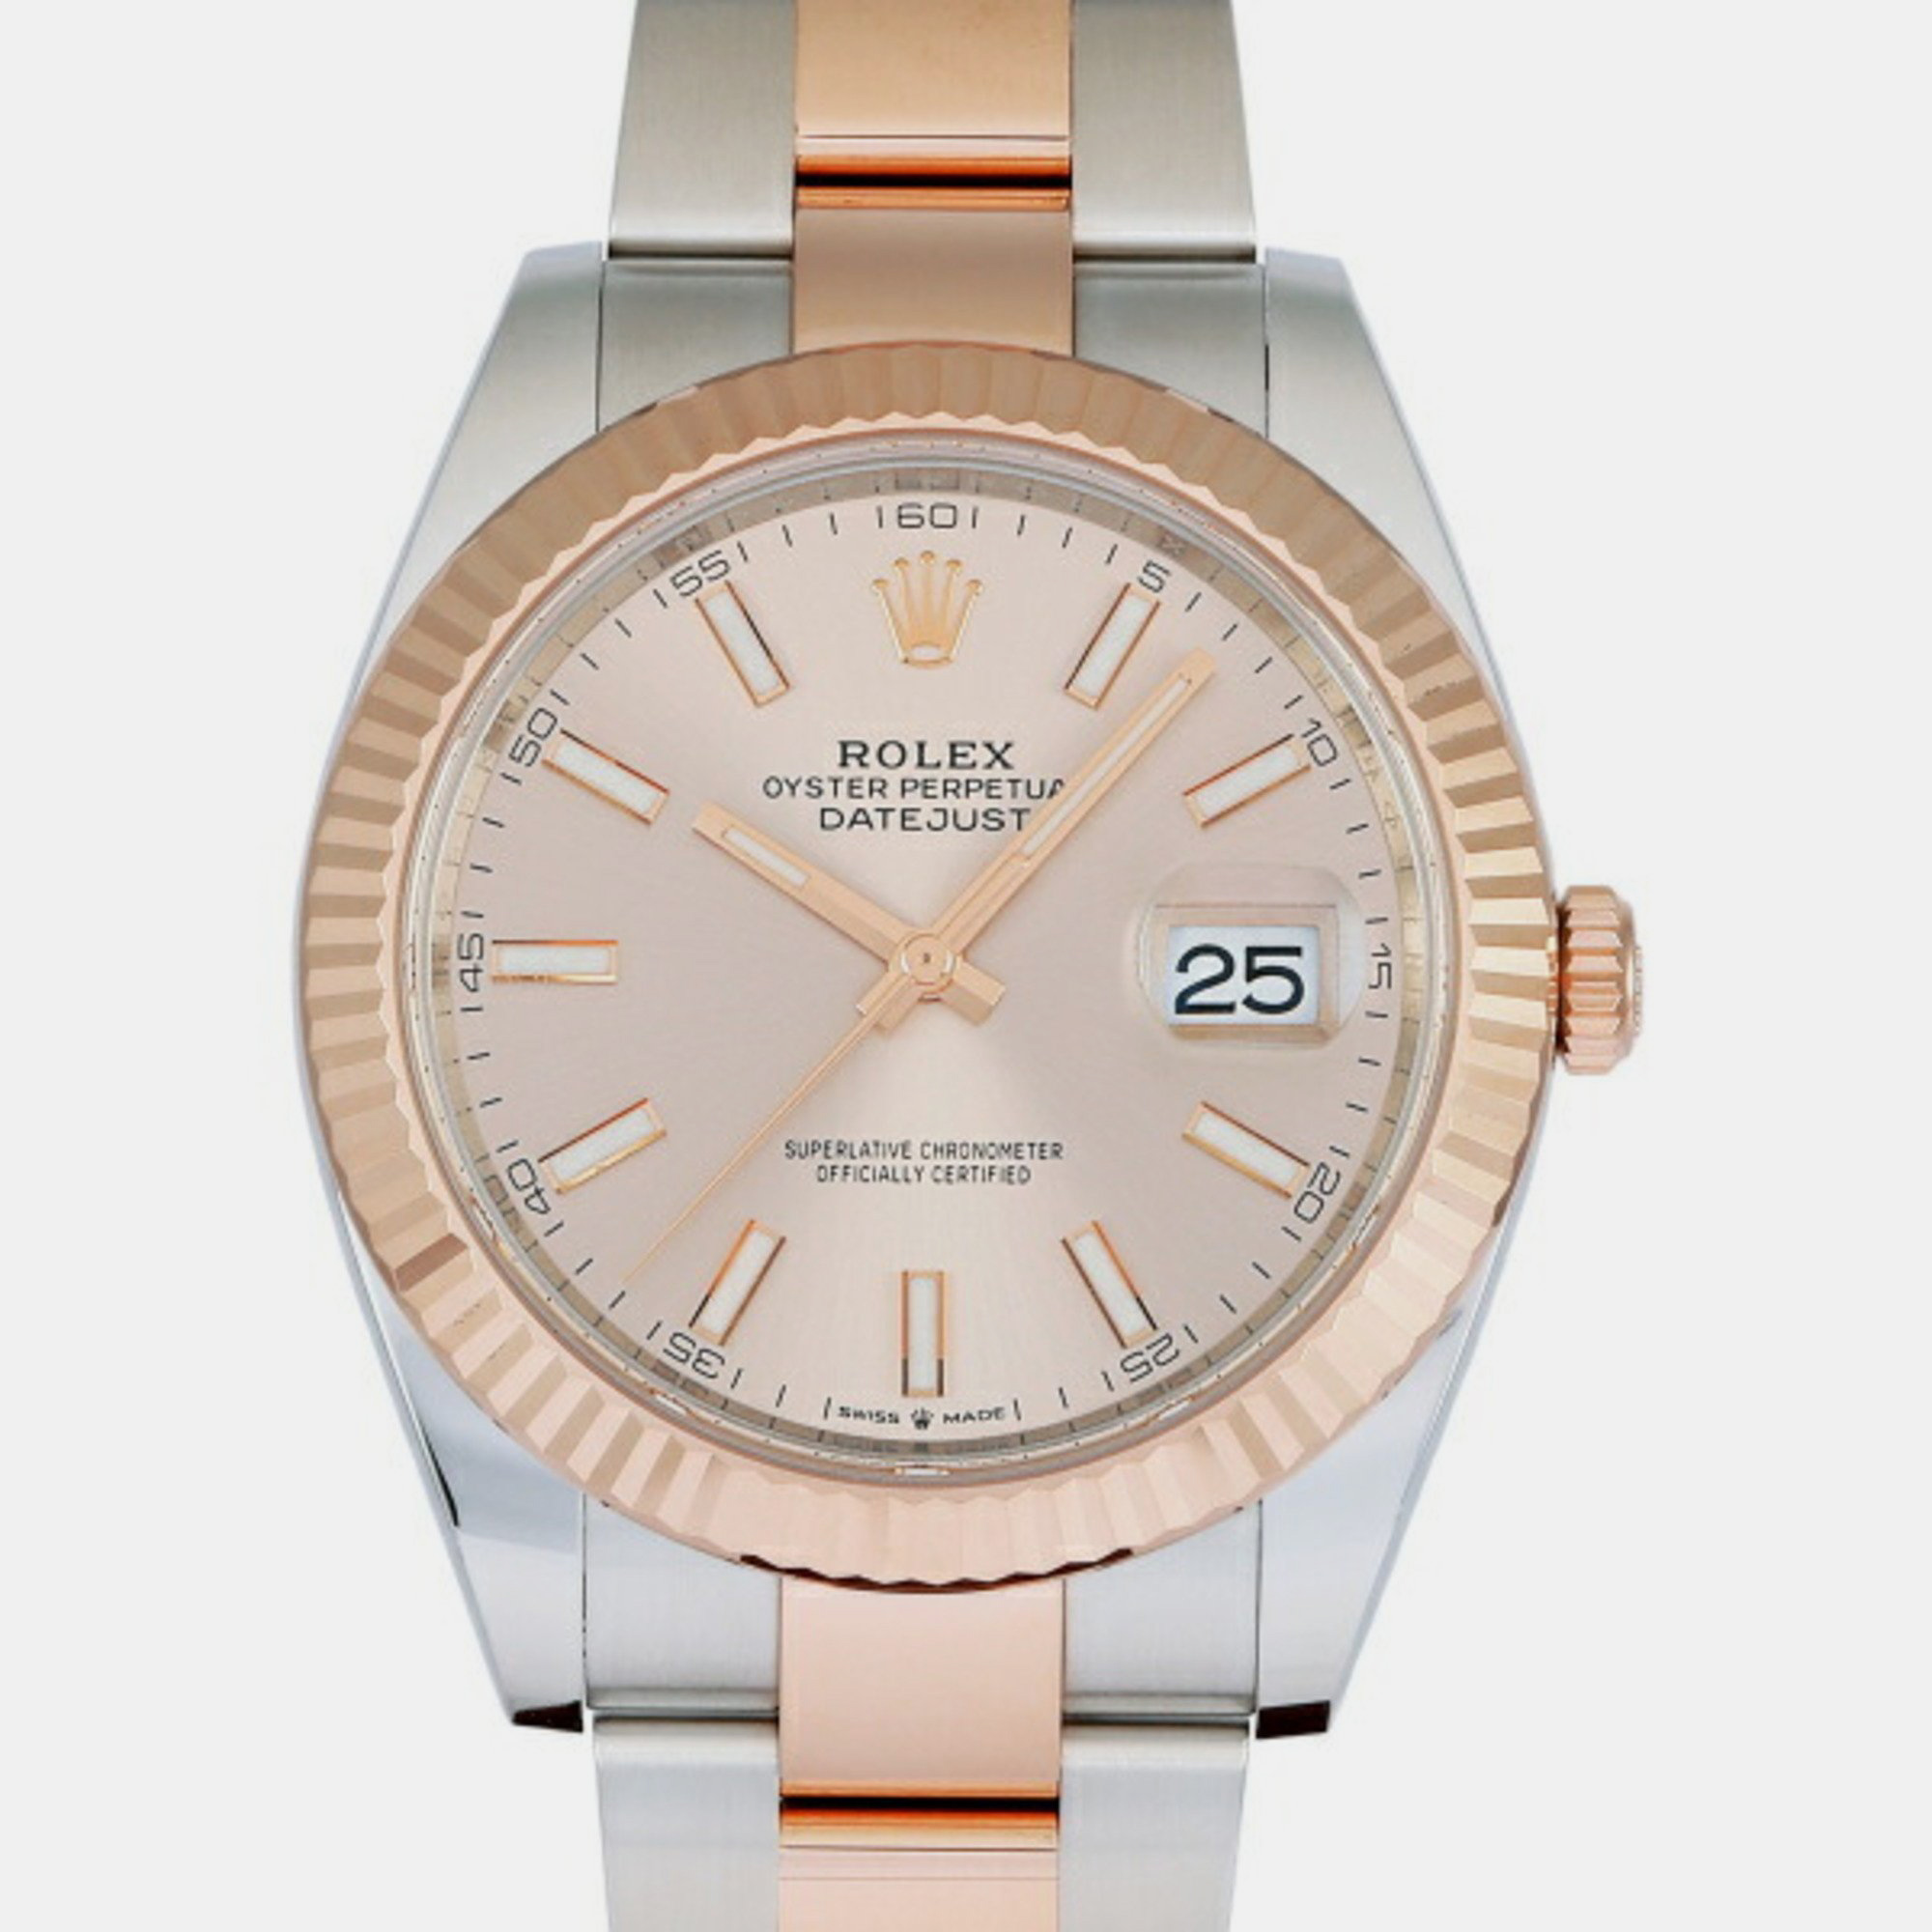 Rolex pink 18k rose gold and stainless steel datejust 126331 automatic men's wristwatch 41 mm